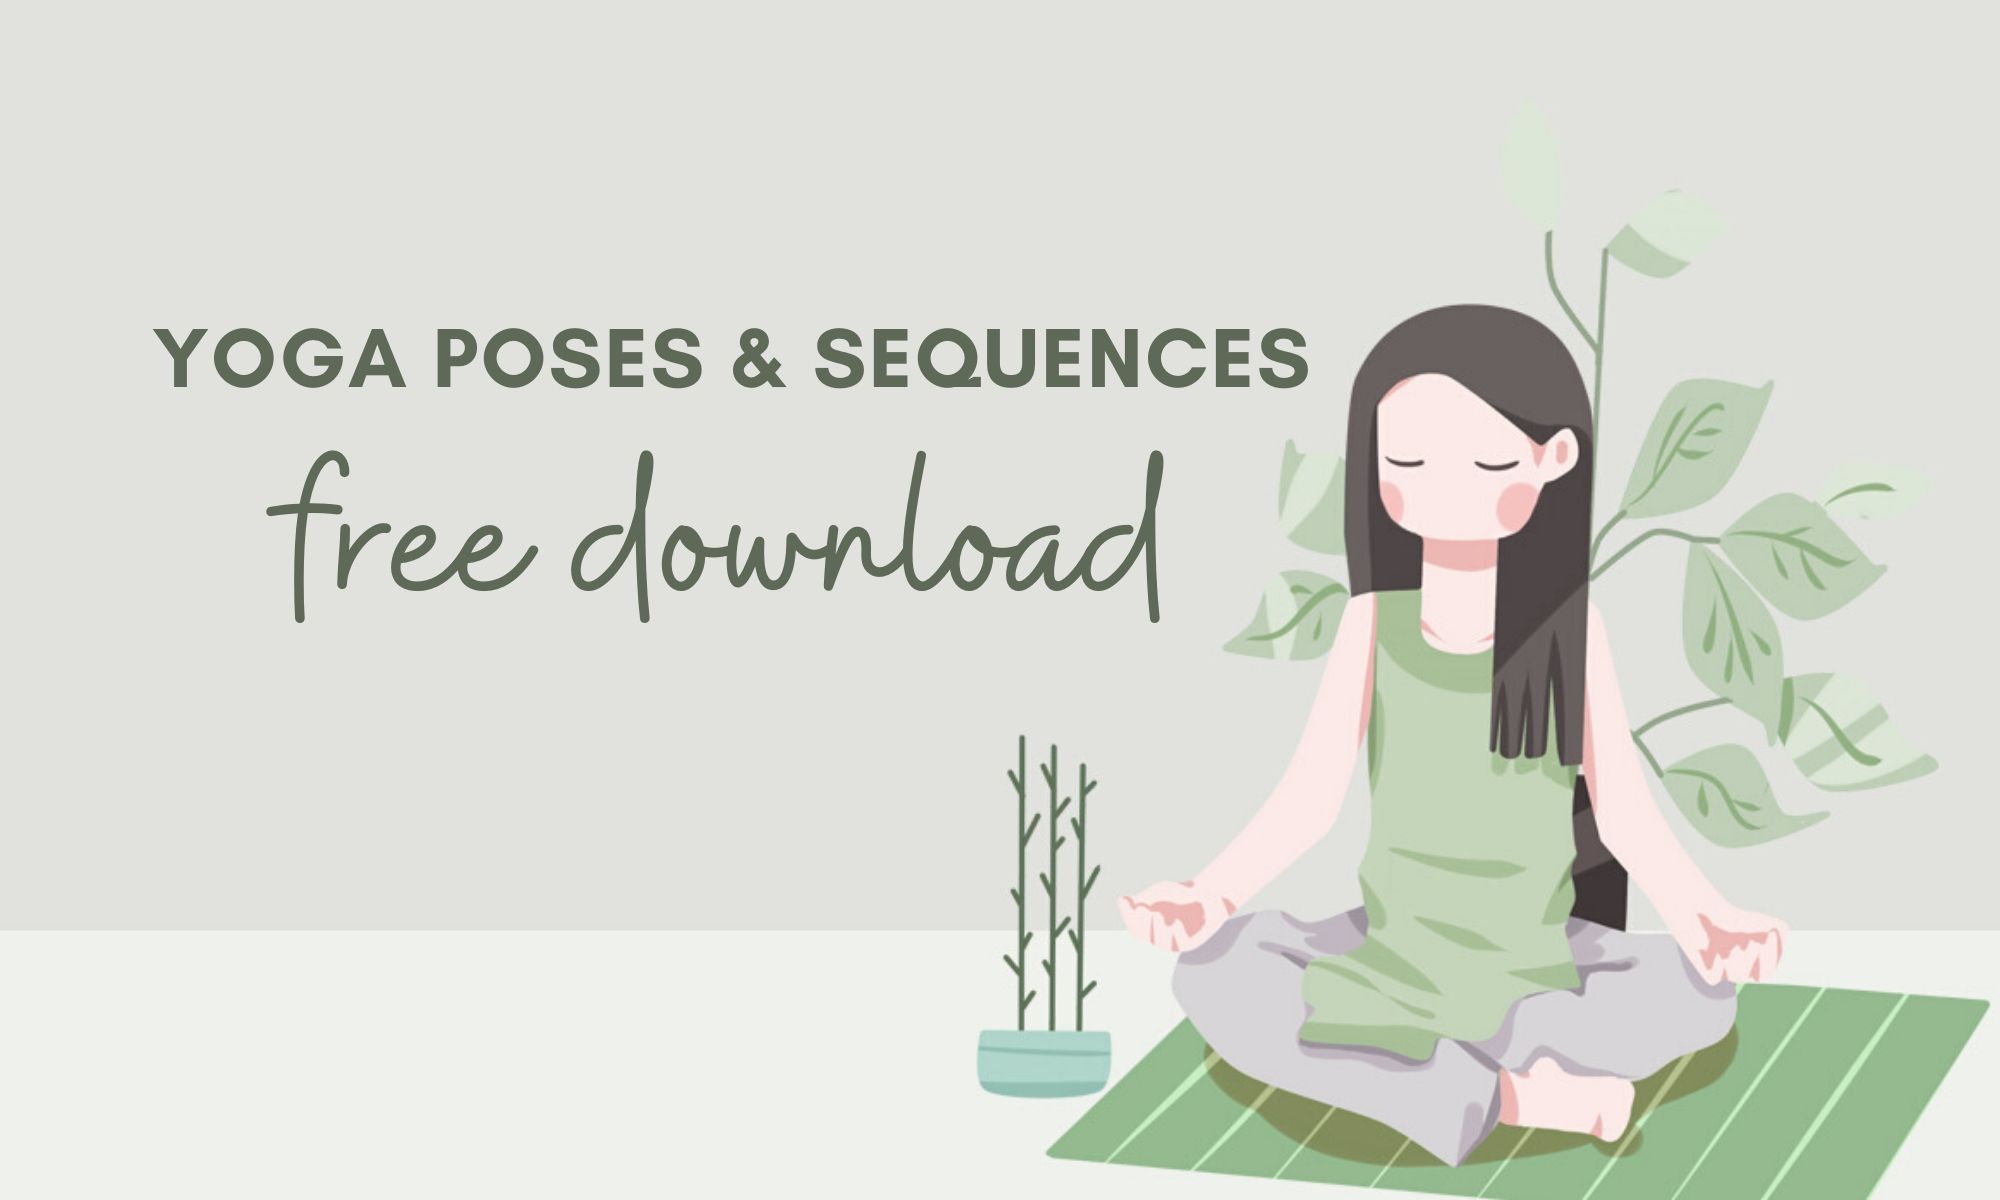 Yoga Poses Vector Outline Free Download @ Outline.pics